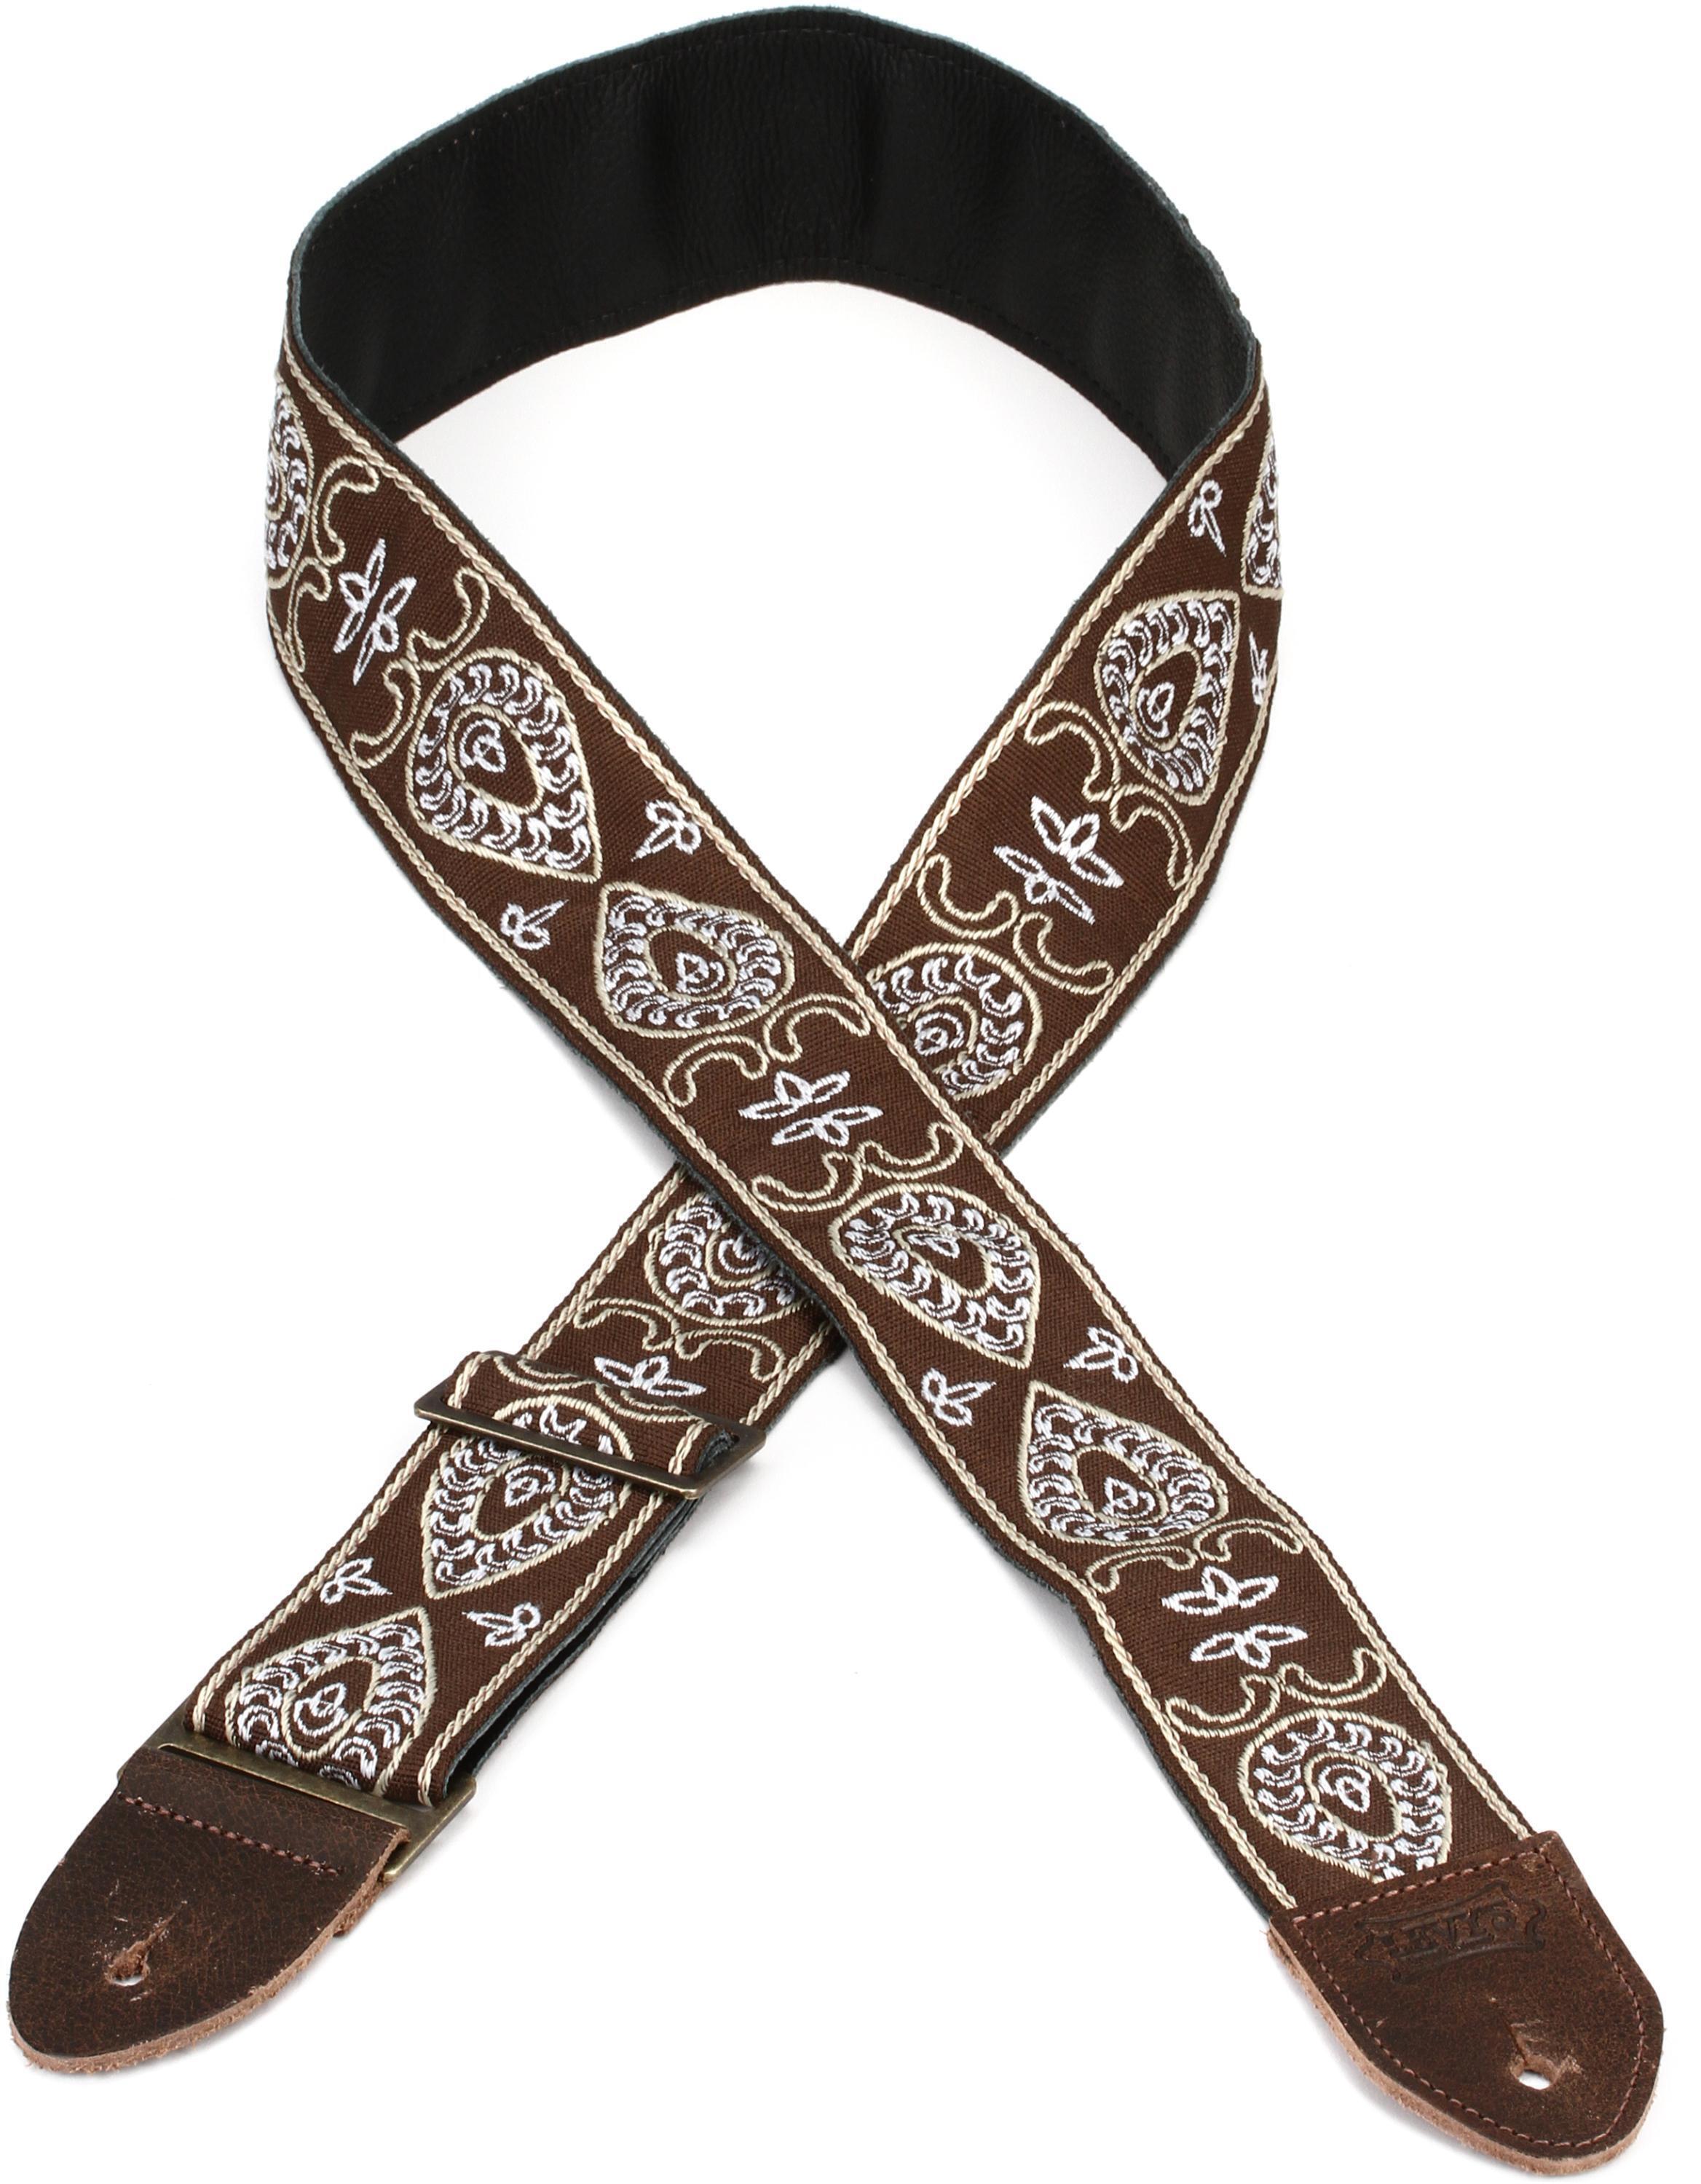 Levy's M8HTV Jacquard Weave Guitar Strap - Brown and White Motif ...